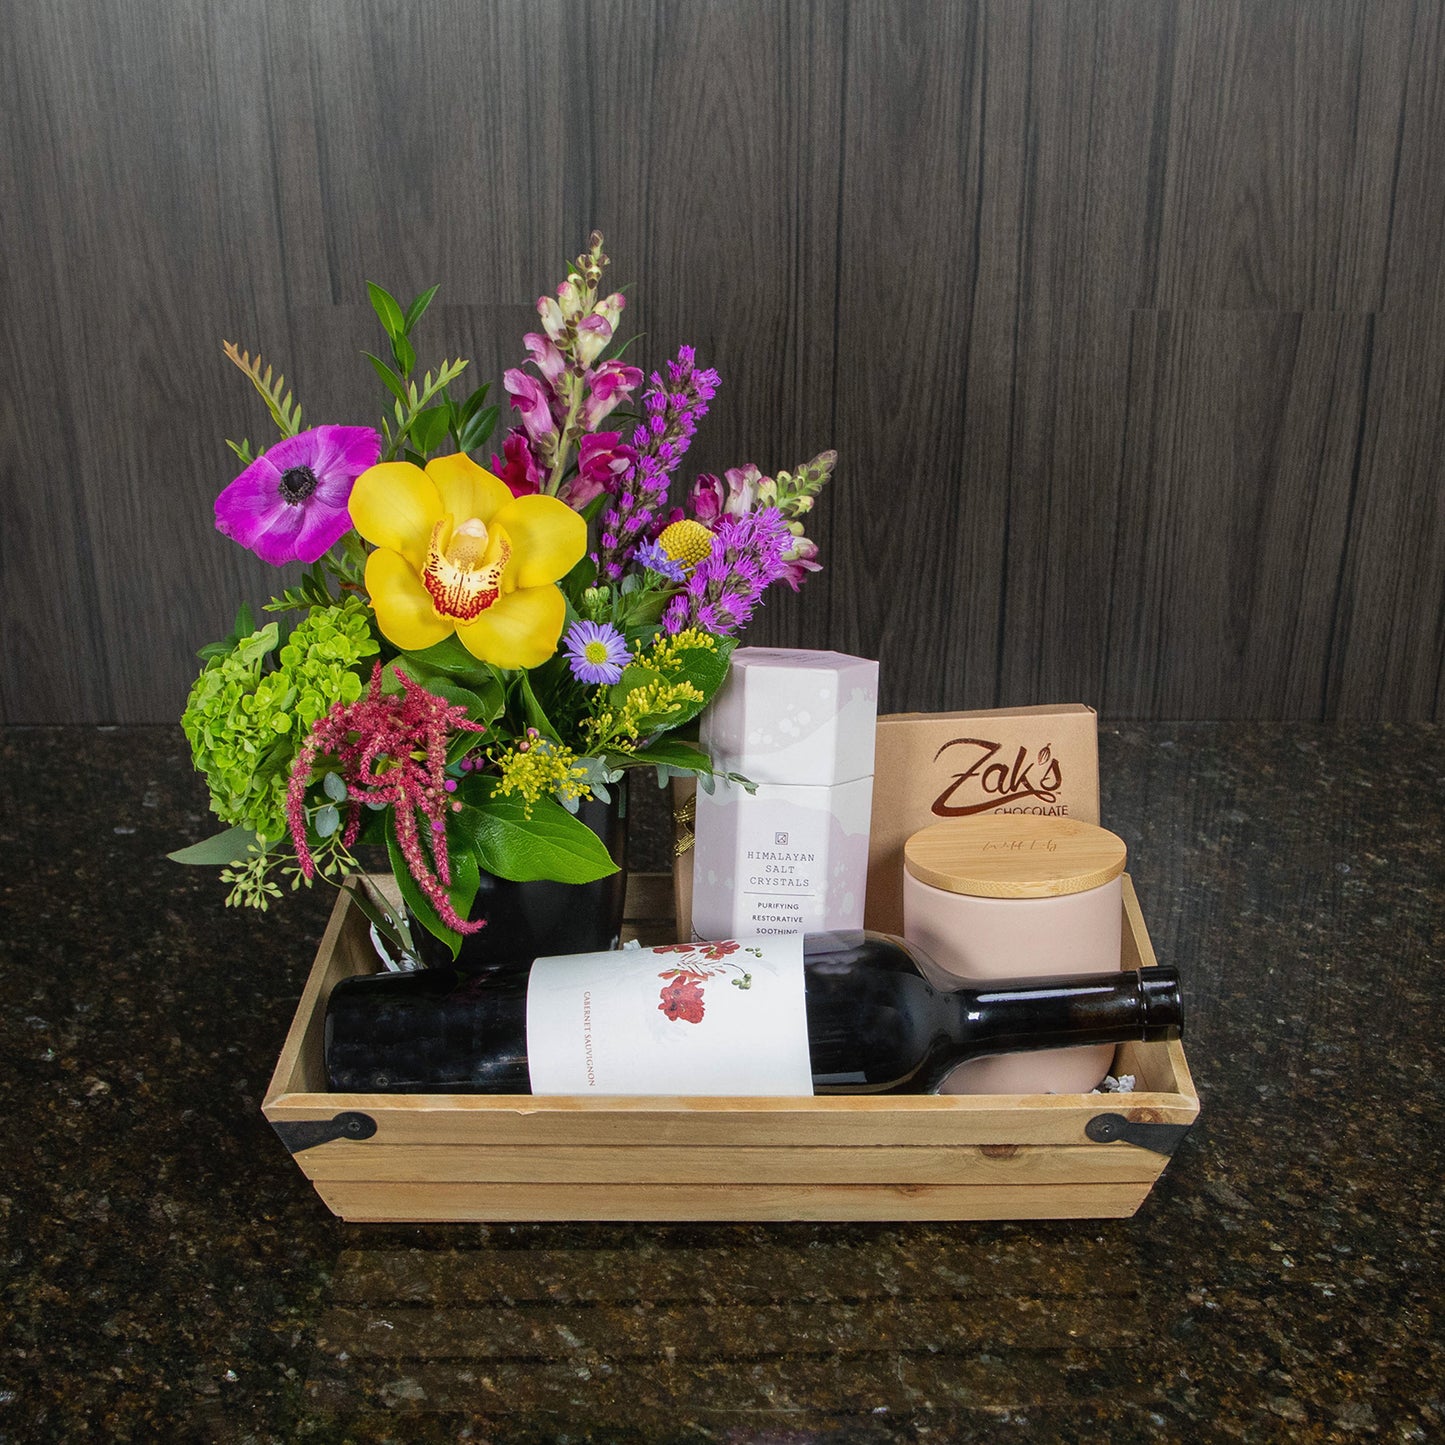 a gift basket with flowers, wine, a candle, chocolates, and salt crystals